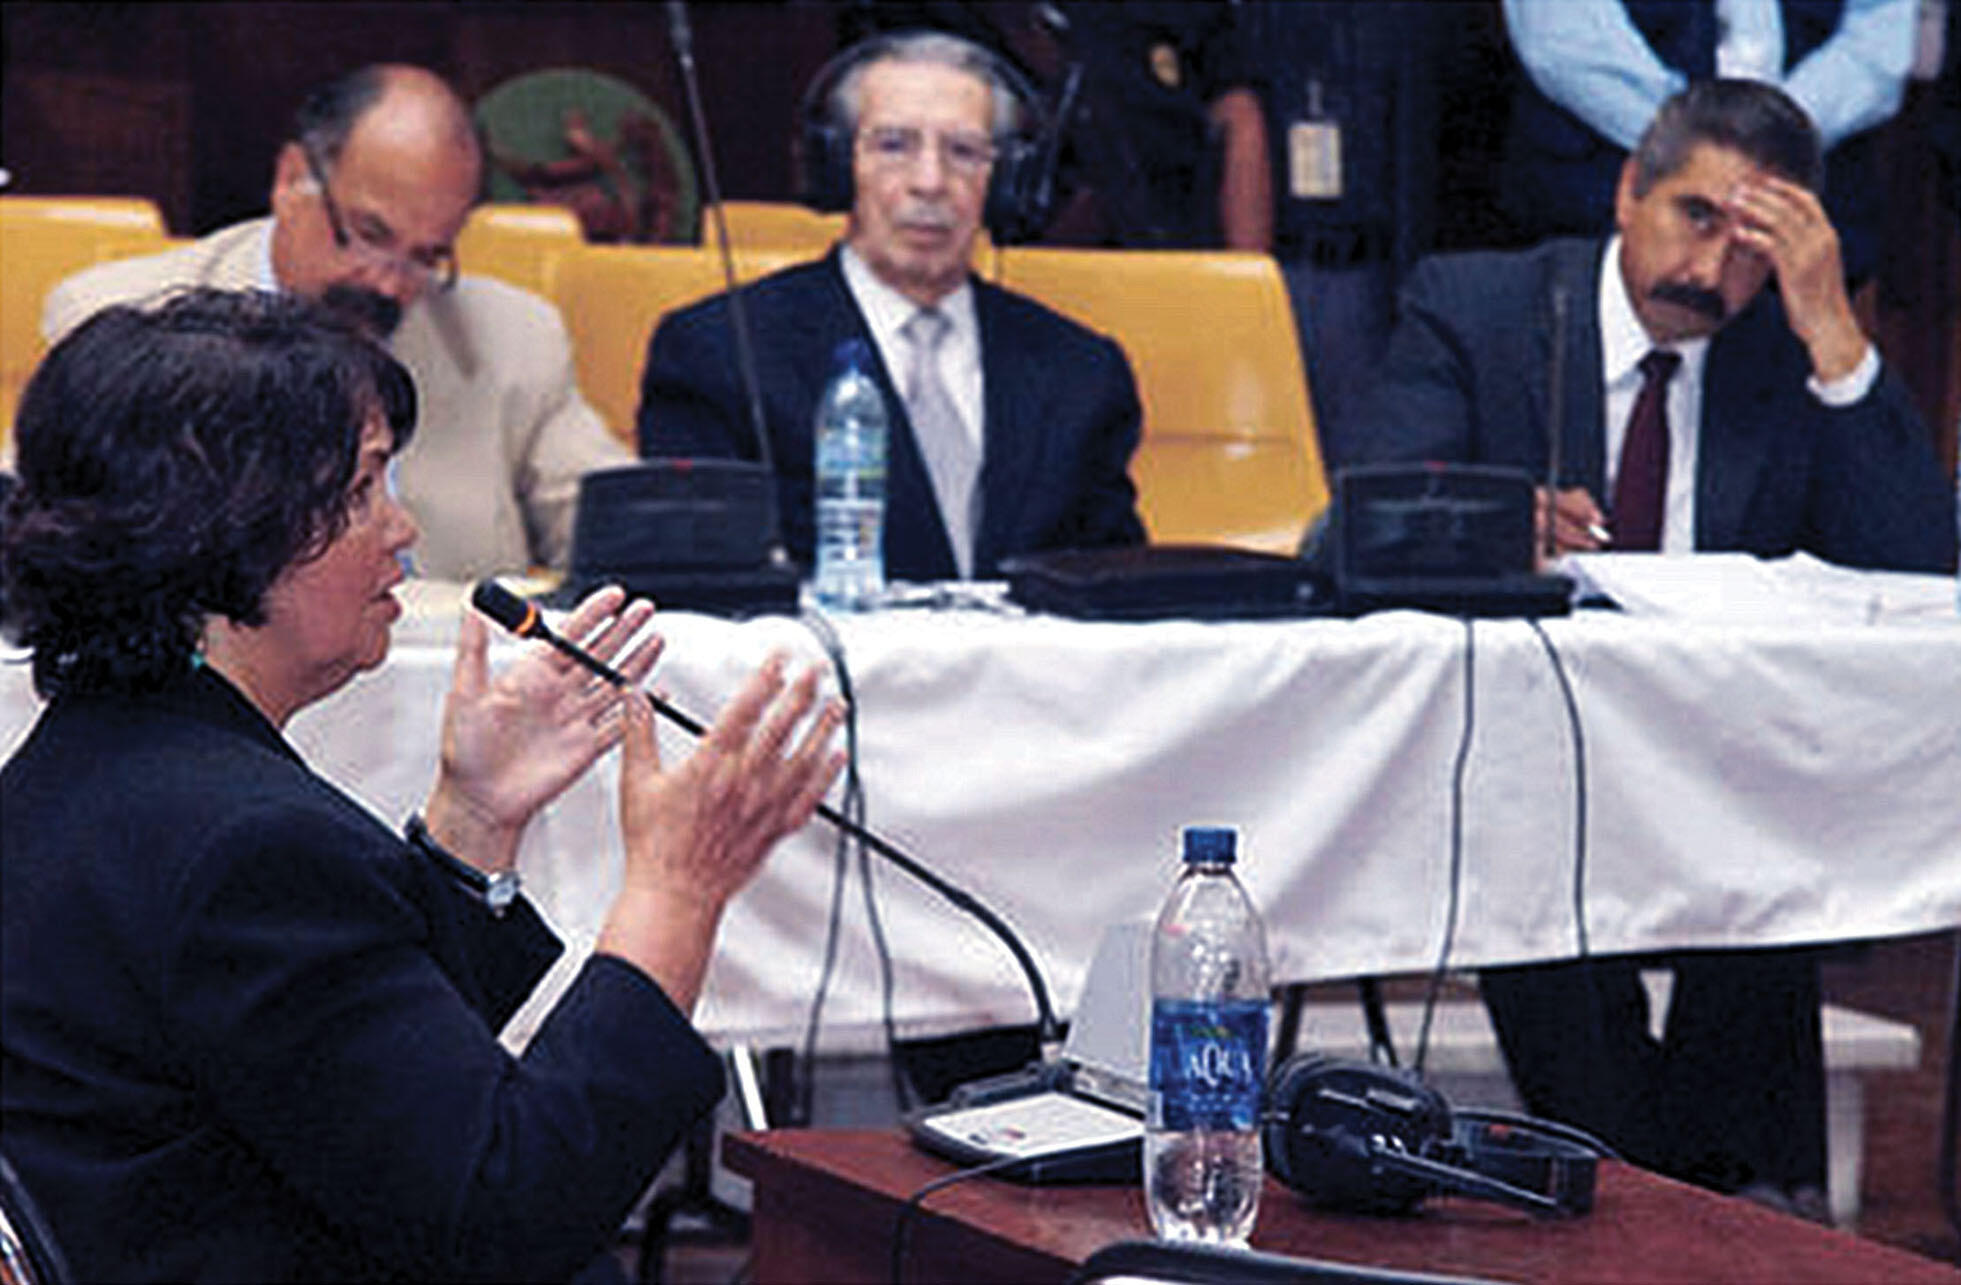 Beatriz Manz testifies for the prosecution of Efraín Ríos Montt, who watches from a table in the background, April 2013. (Photo courtesy of Siglo21.)